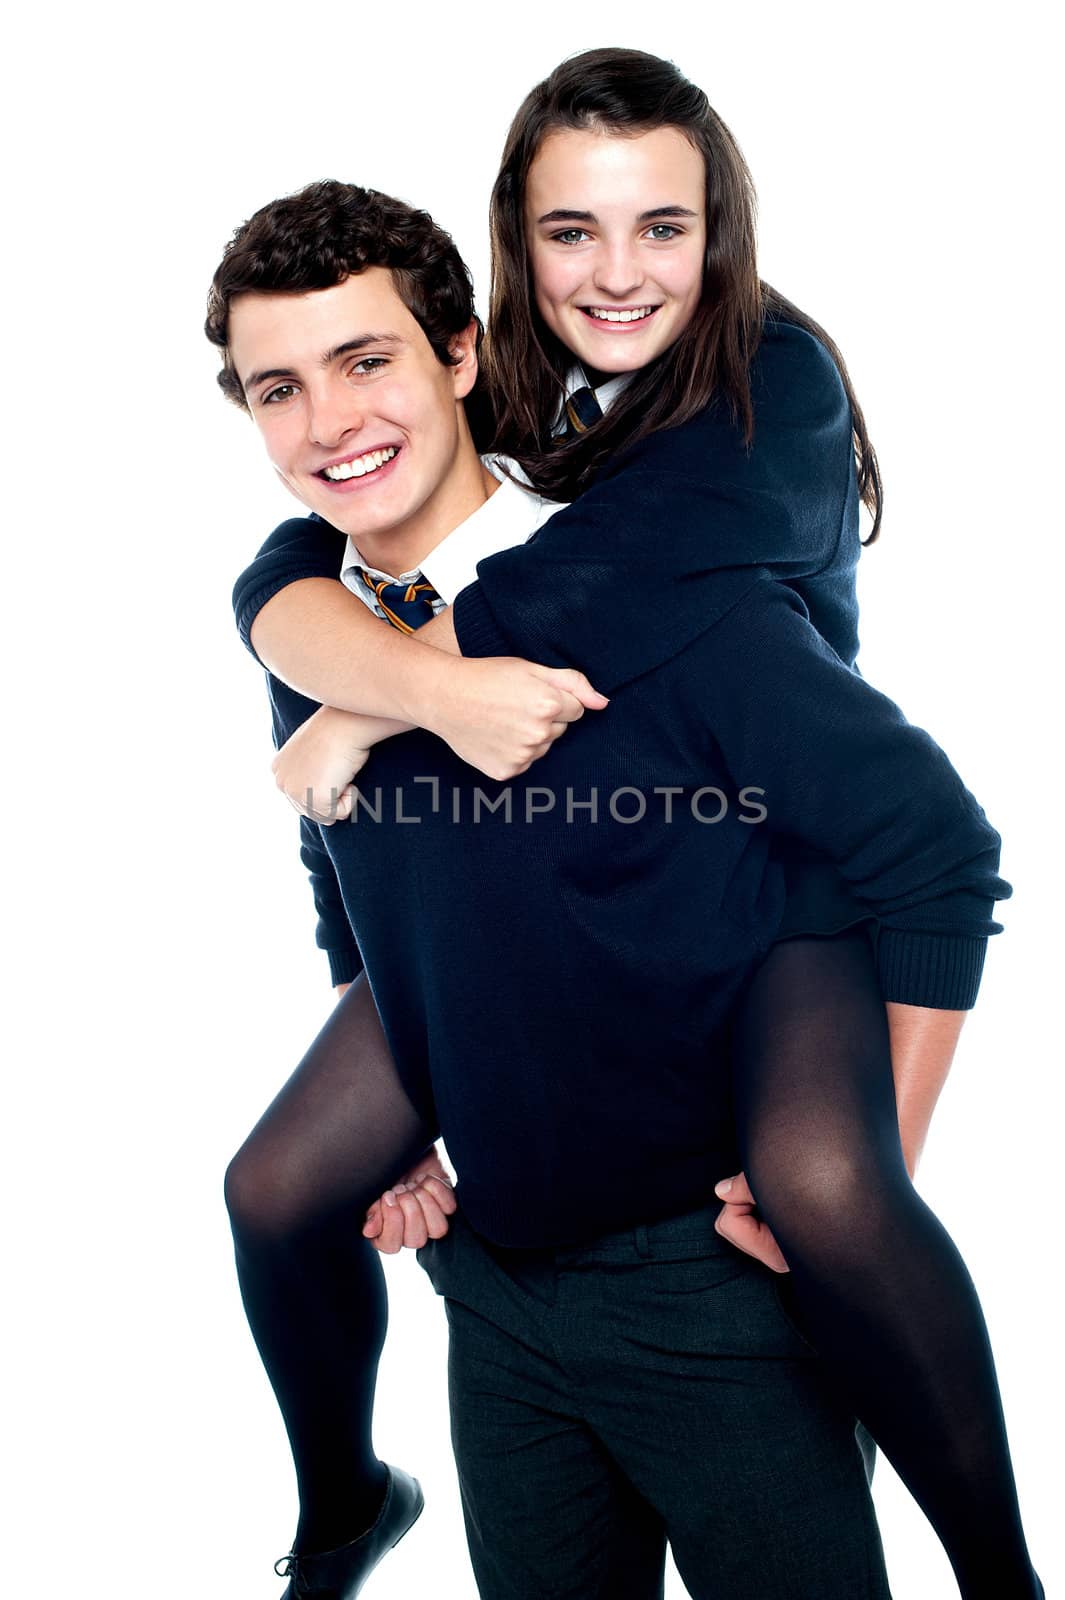 Girl riding piggyback and embracing boy tightly by stockyimages